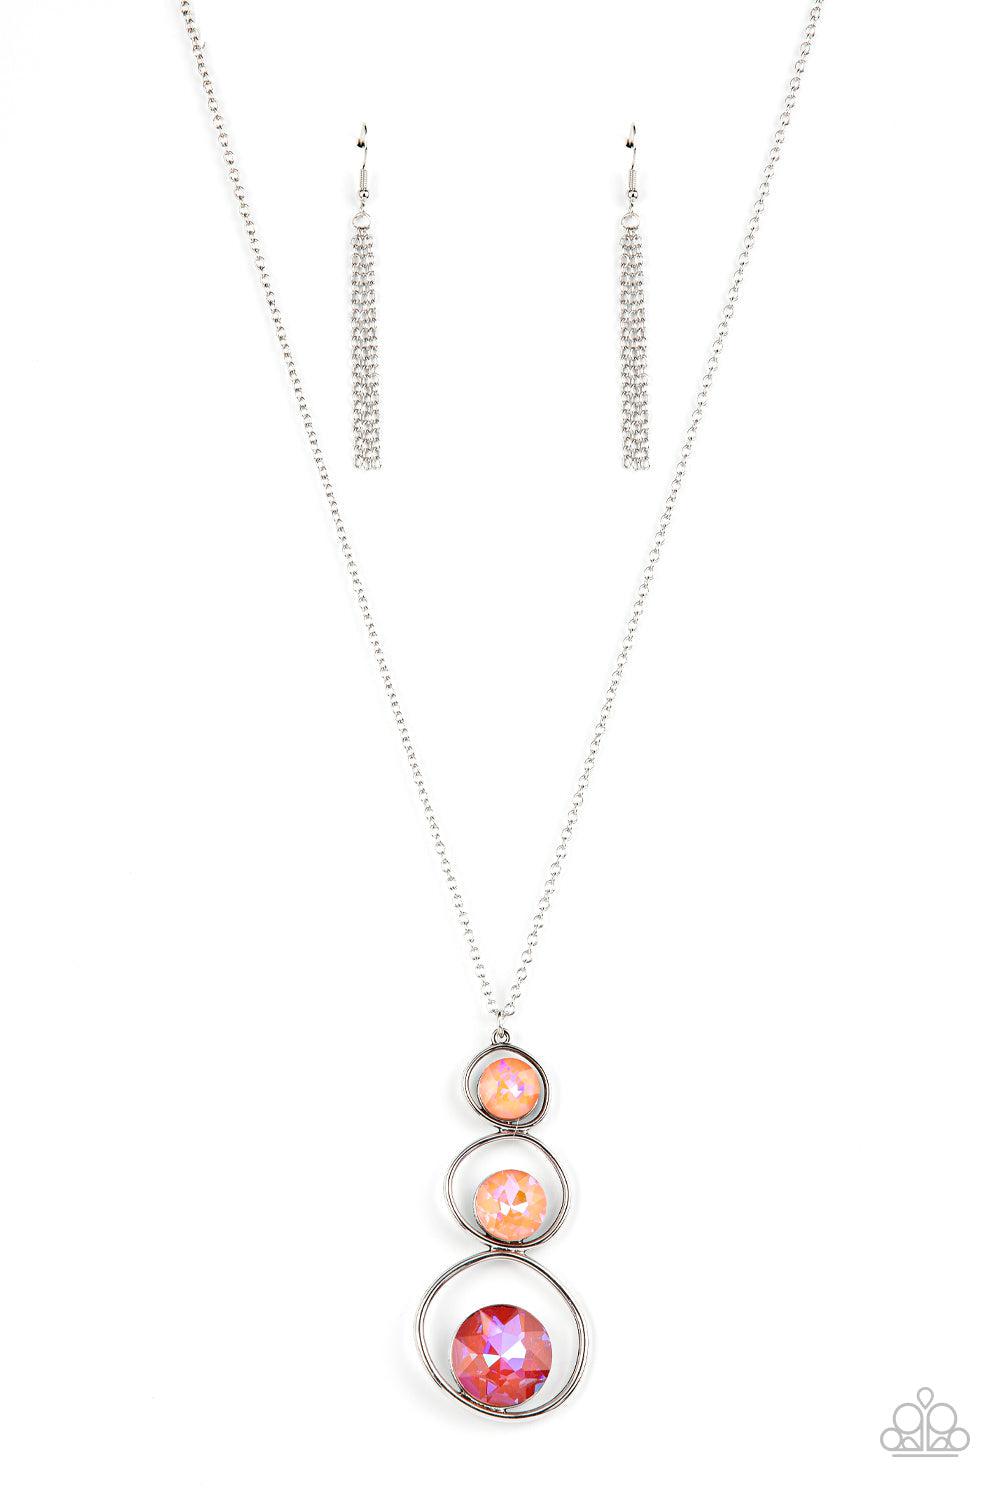 Celestial Courtier Coral Orange Gem Necklace - Paparazzi Accessories- lightbox - CarasShop.com - $5 Jewelry by Cara Jewels